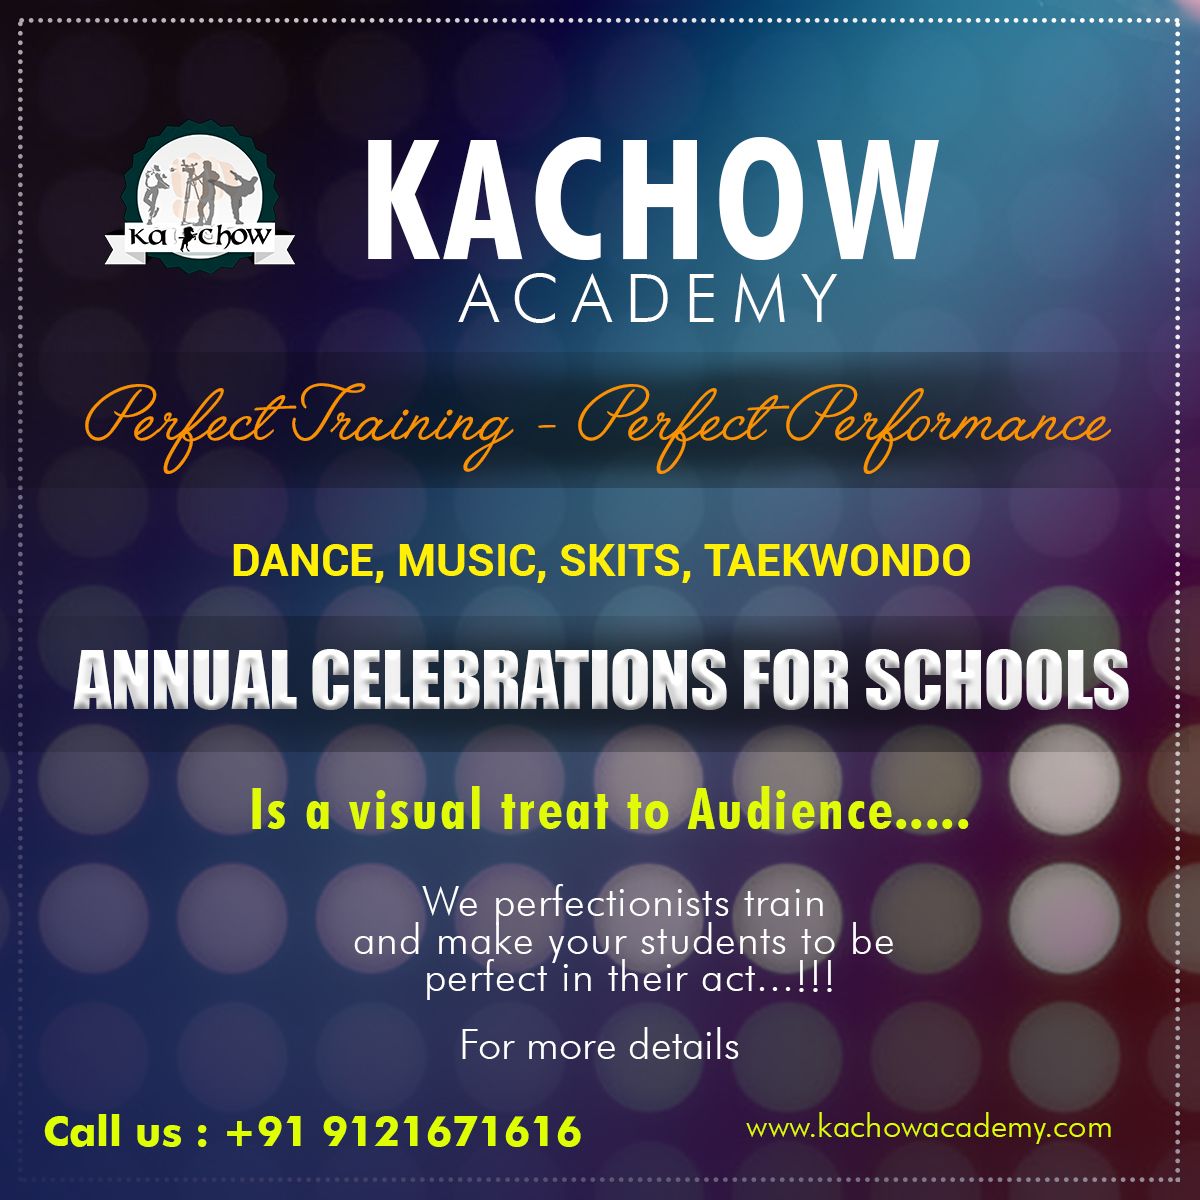 KaCHOW is offering you a chance to prove yourself - Entry@400/-ON   24th Nov 19 